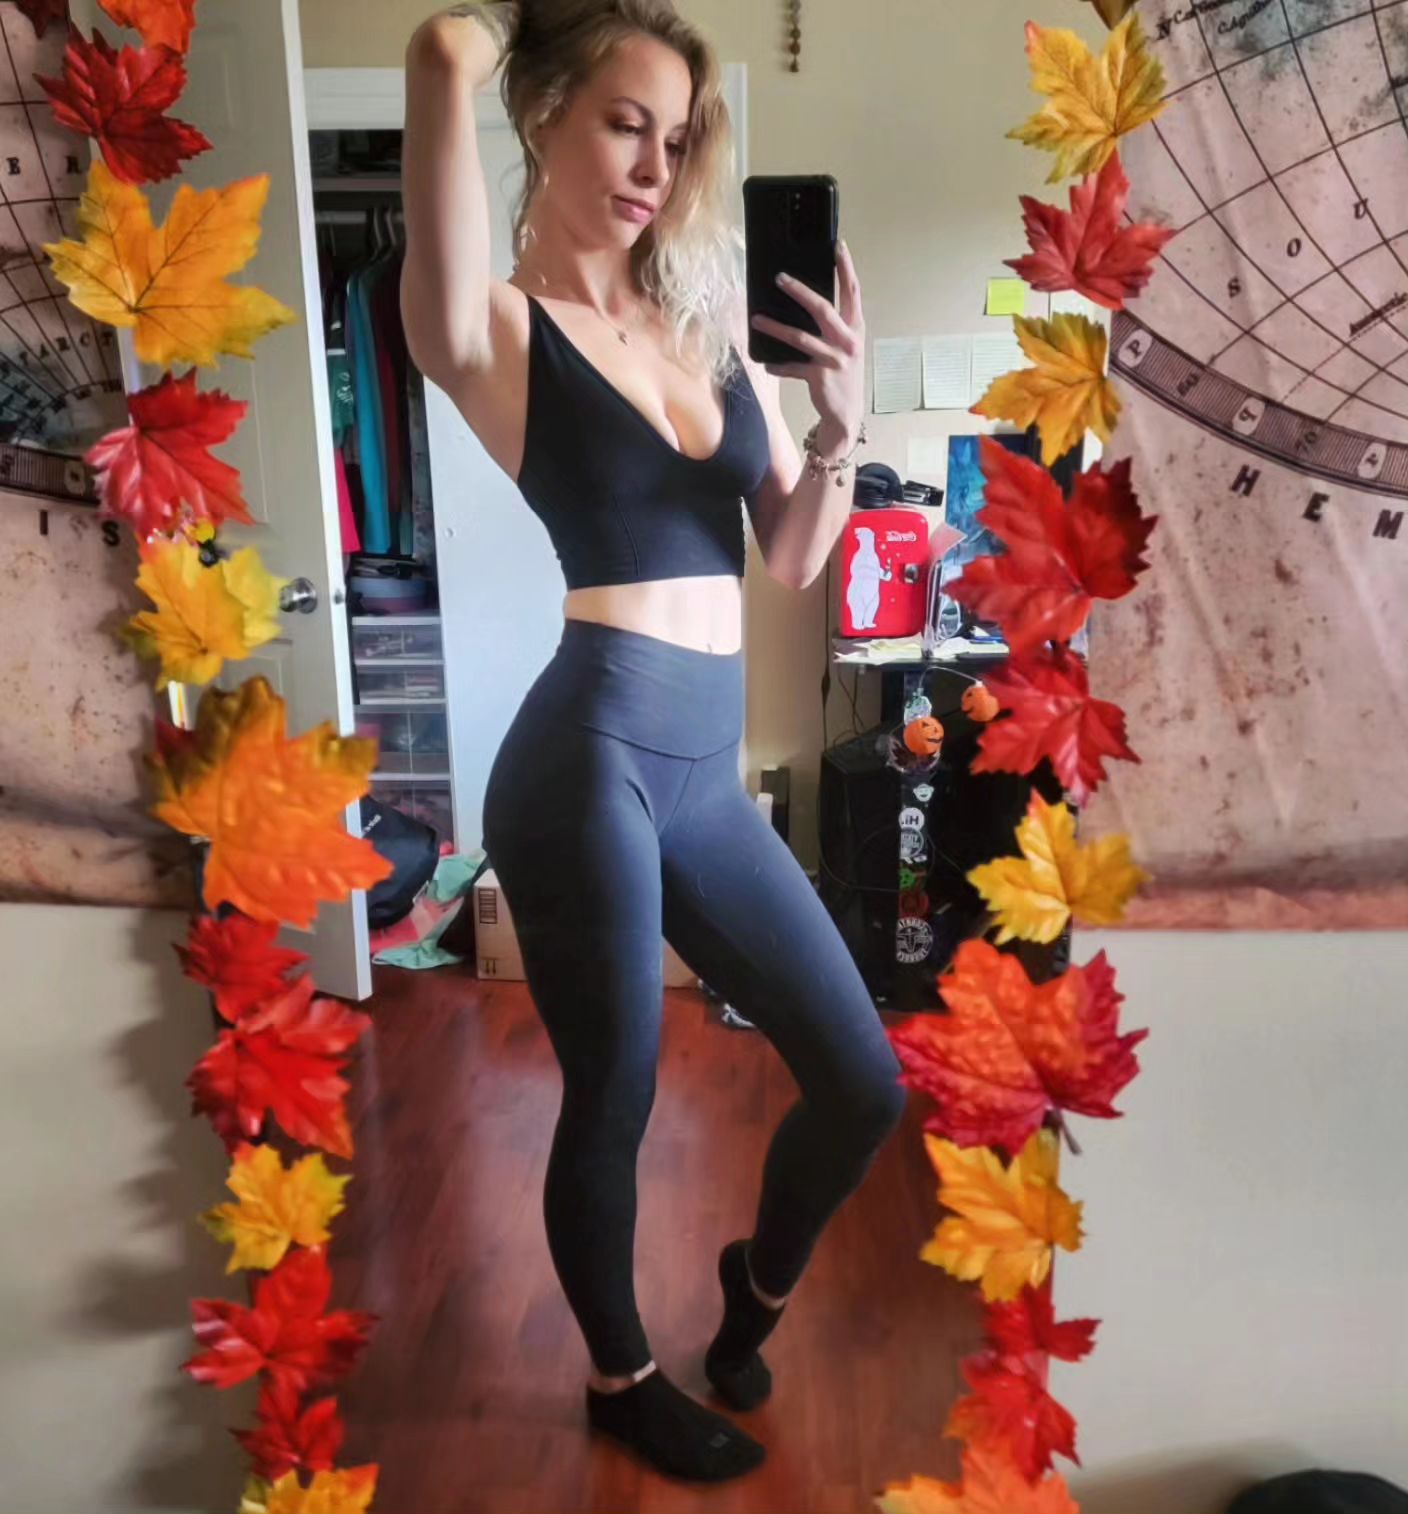 Talk about fall vibes 🍂🍁🍂

Top: @sheinofficial
Pants: @lululemon

@theofficialpandora
@fitbit

#sg #linkinbio #fitness #modelmayhem #modelsofig #modelsofinstagram #blondie #photoshoot #workout #fitnessmodel #leaves #gnd #canadianbabe #canadiangirls #canadianmodel #falldecor #beauty #discover #explore #leaves #babes #cutegirls  #mirrorselfie #autumn #halloween #autumnvibes #onlyfanz #hotmodel #beautiful #fallvibes